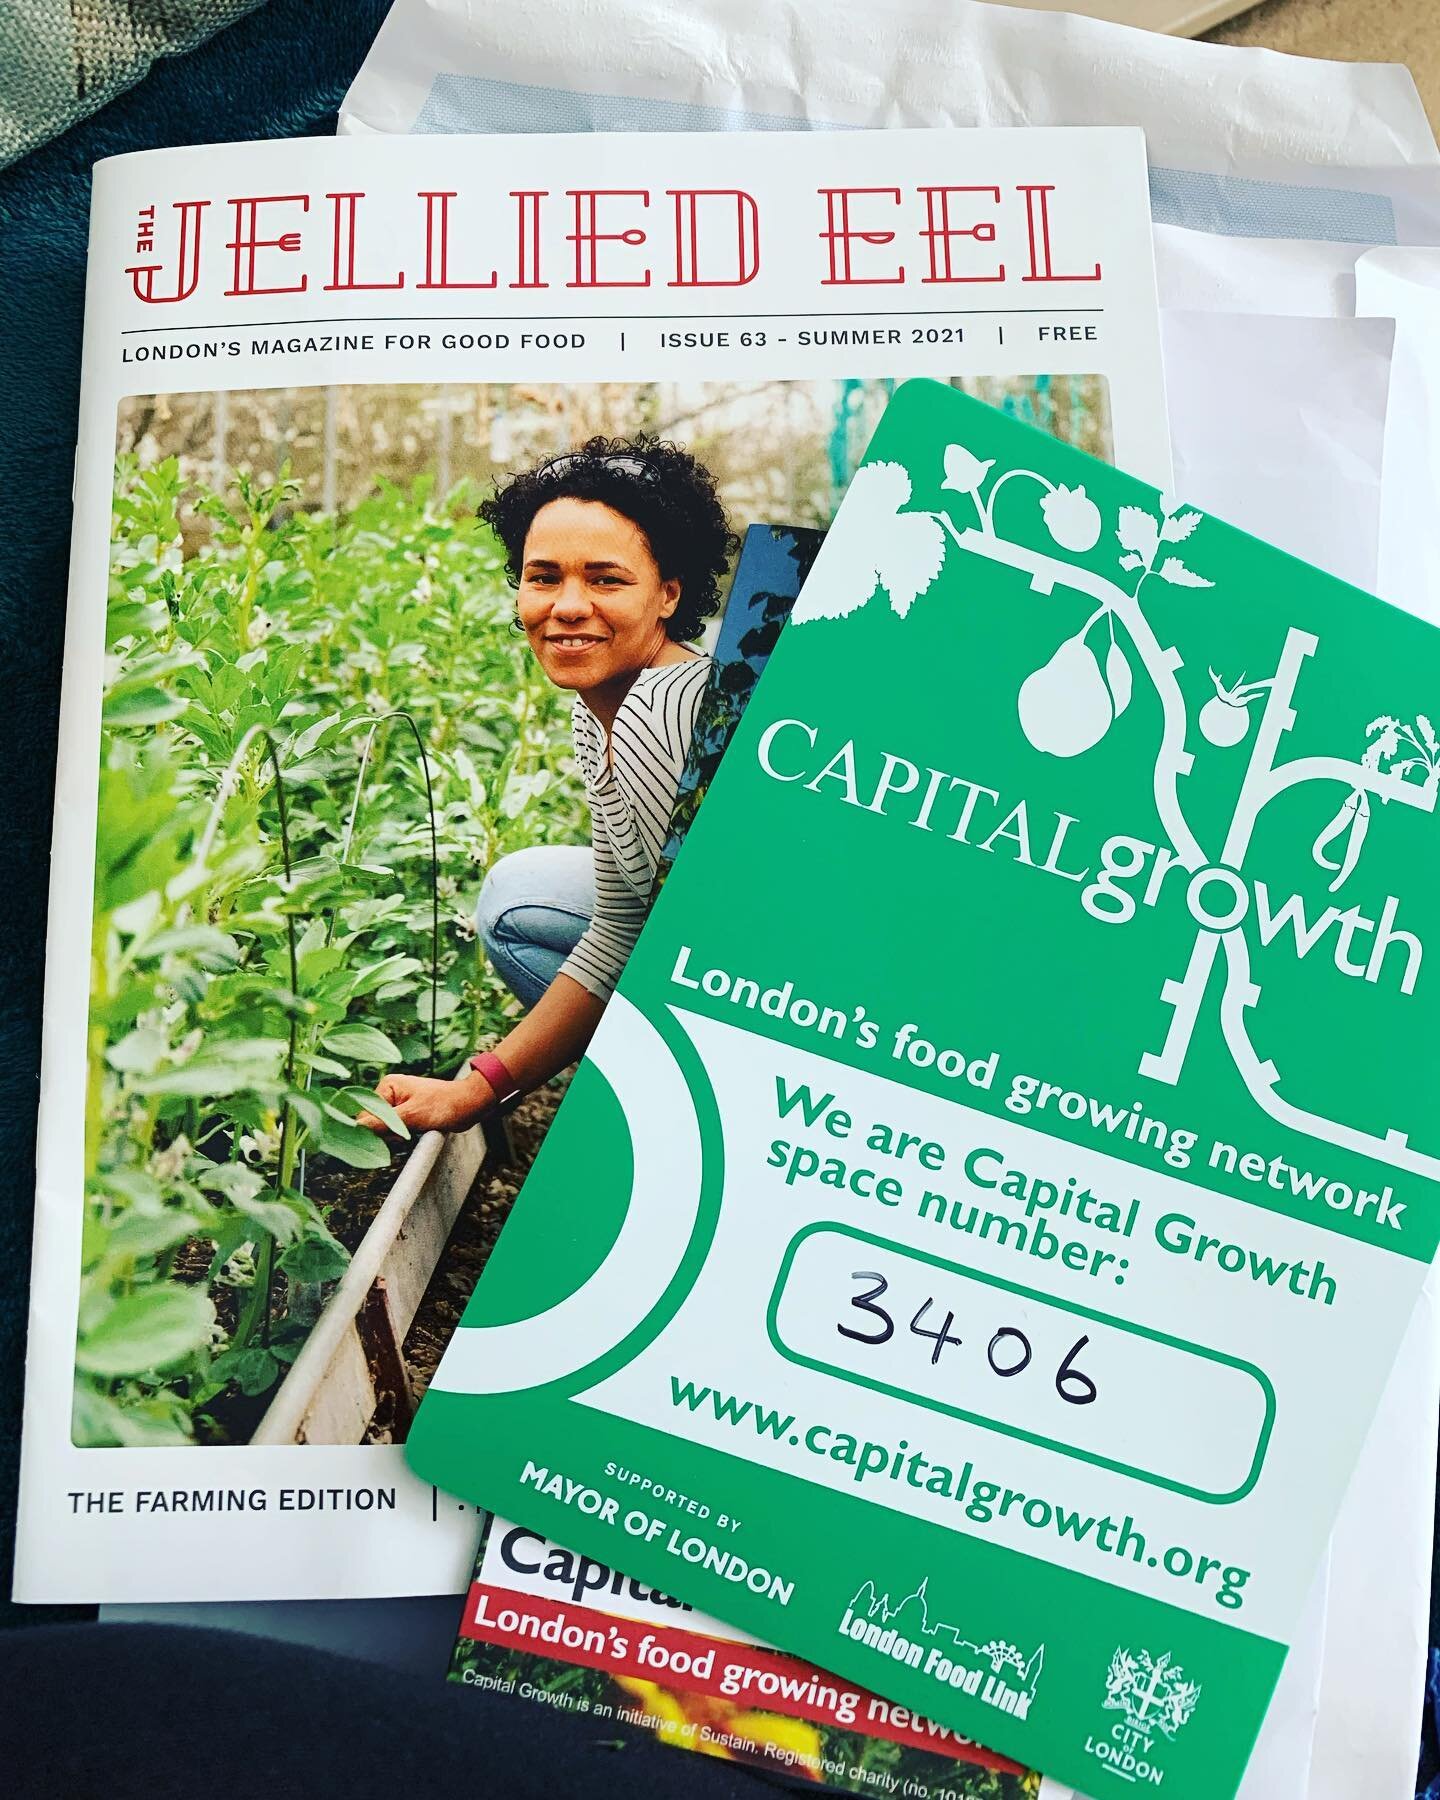 We have really struggled to get our food growing mojo back. But getting this in the post have been the kick up the hun I needed! Thank you @capital_growth #herb #growyourownmedicine #homegrown  #lifestyle #growyourownfood #haseyagarden #apothecary #g